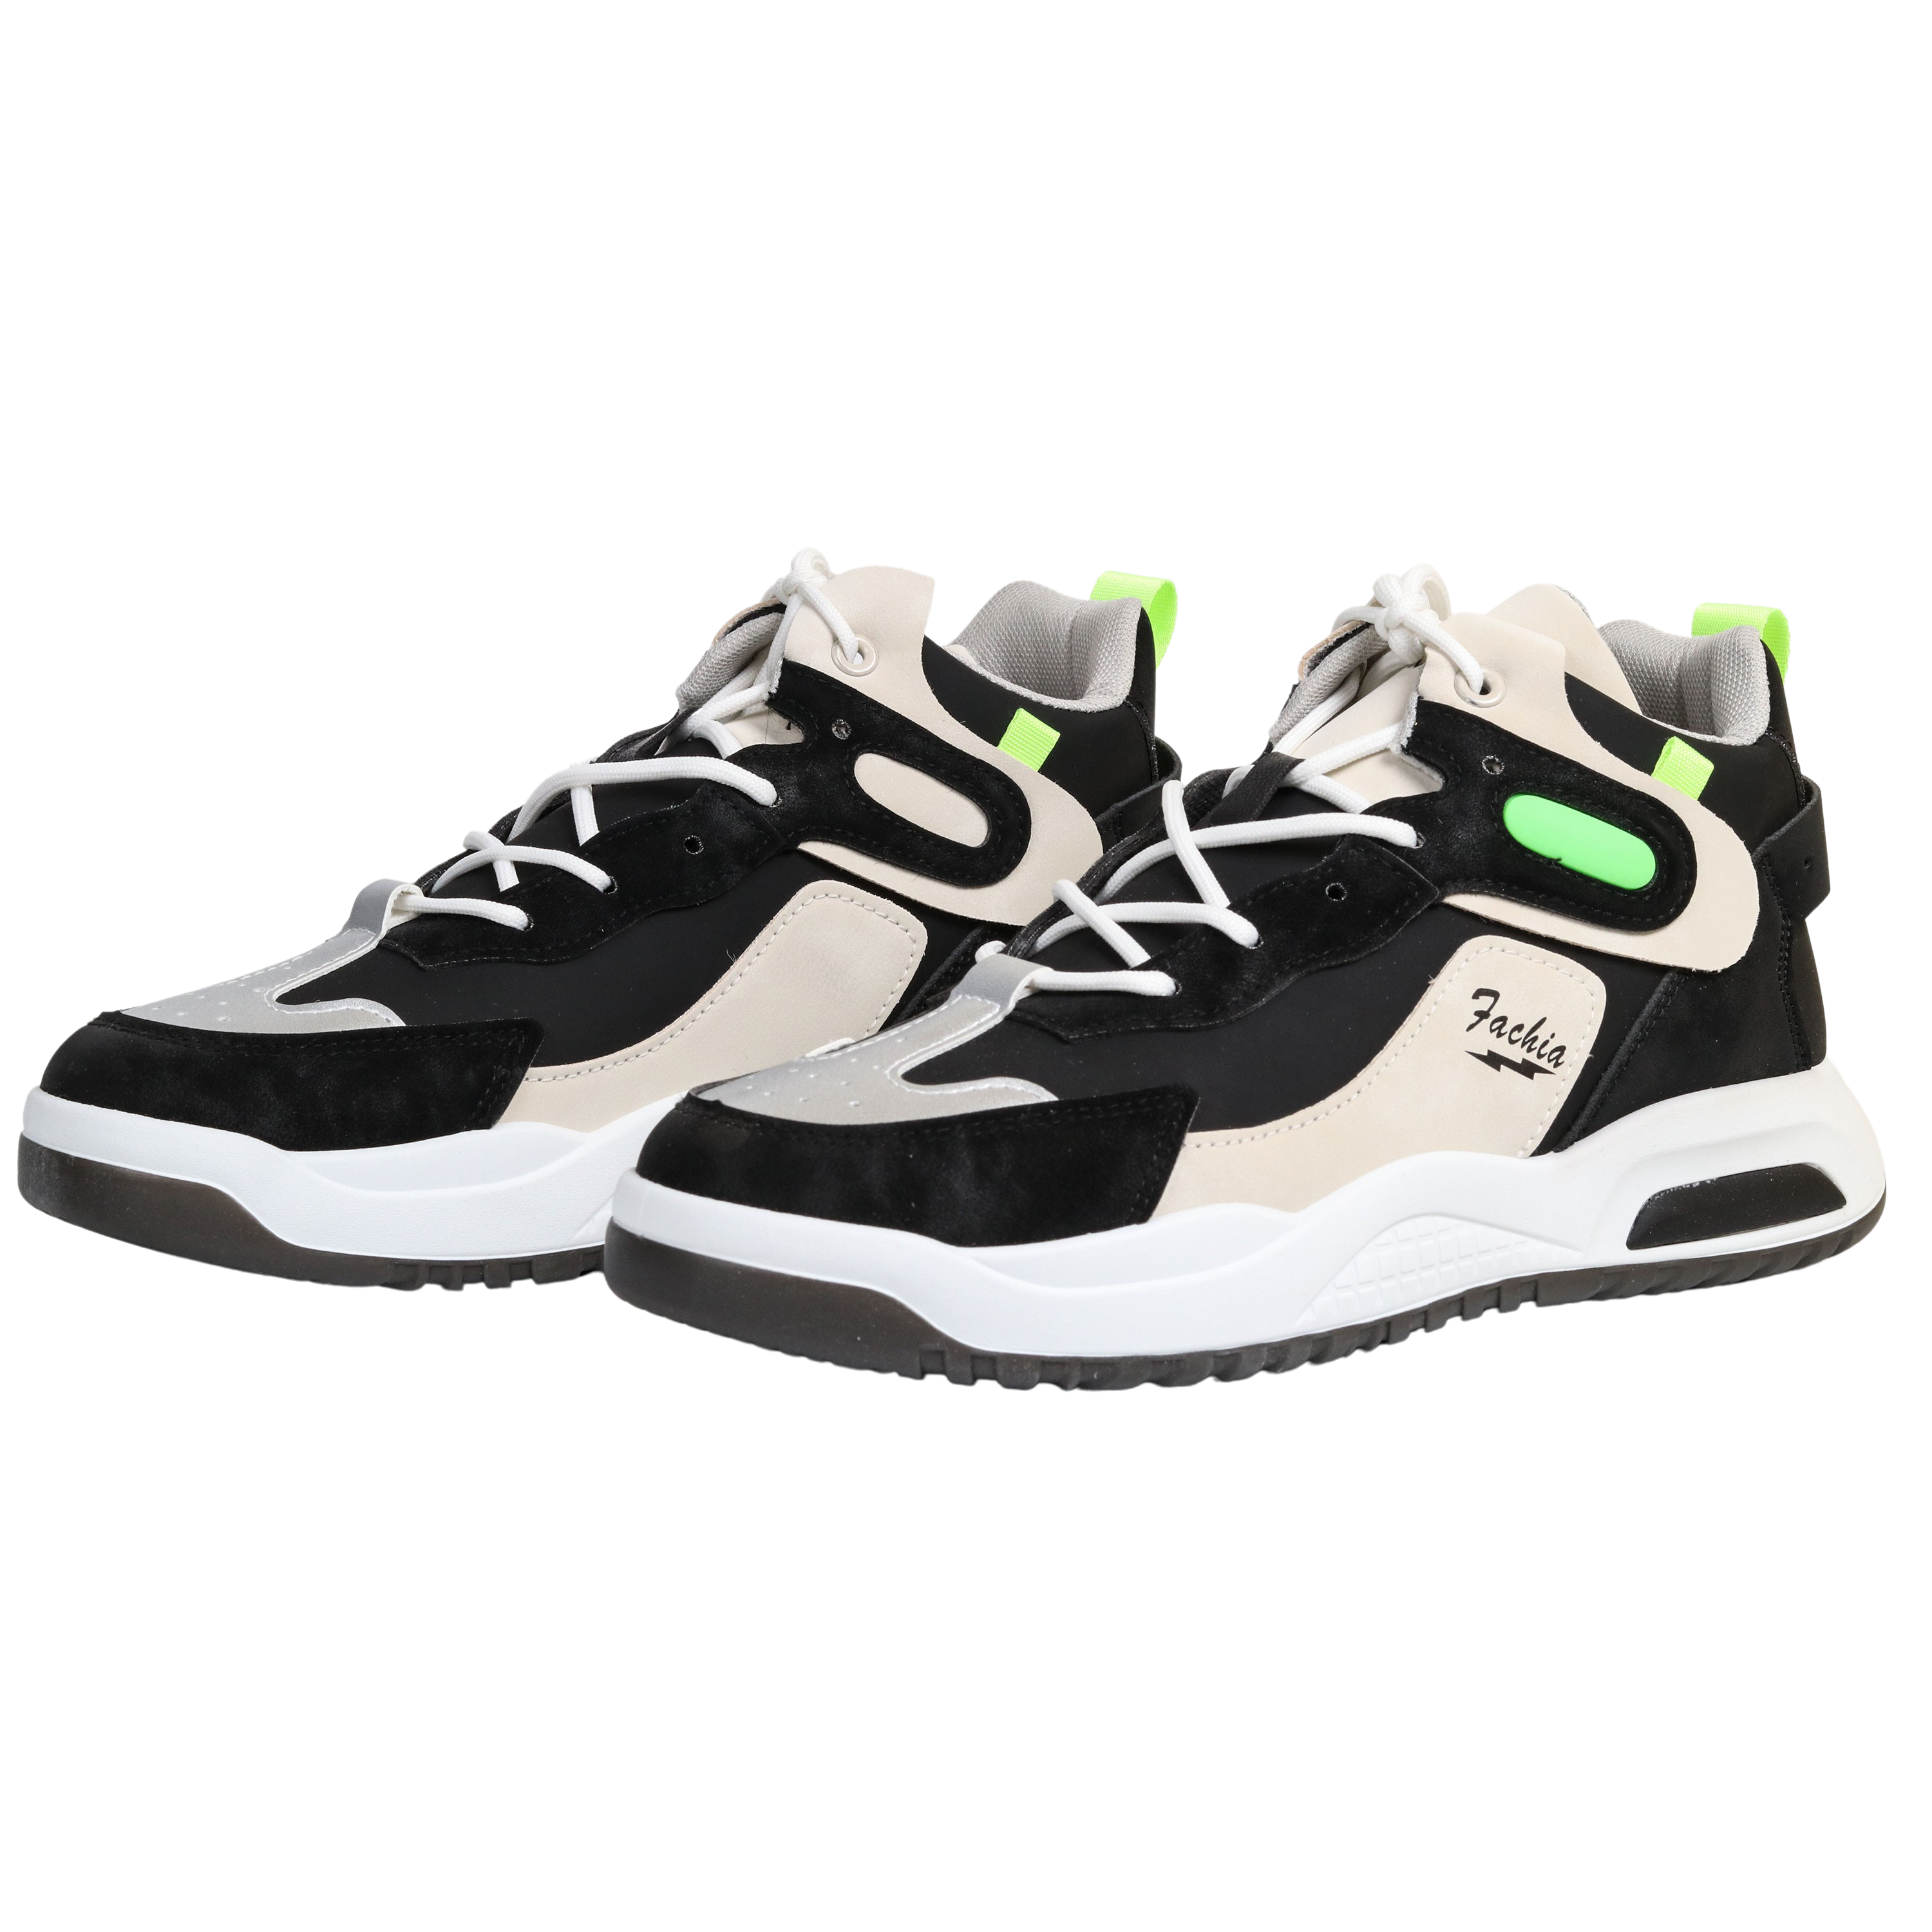 Zays Premium Imported Sneaker Shoe For Men - ZAYSLCC10 (Limited Stock)